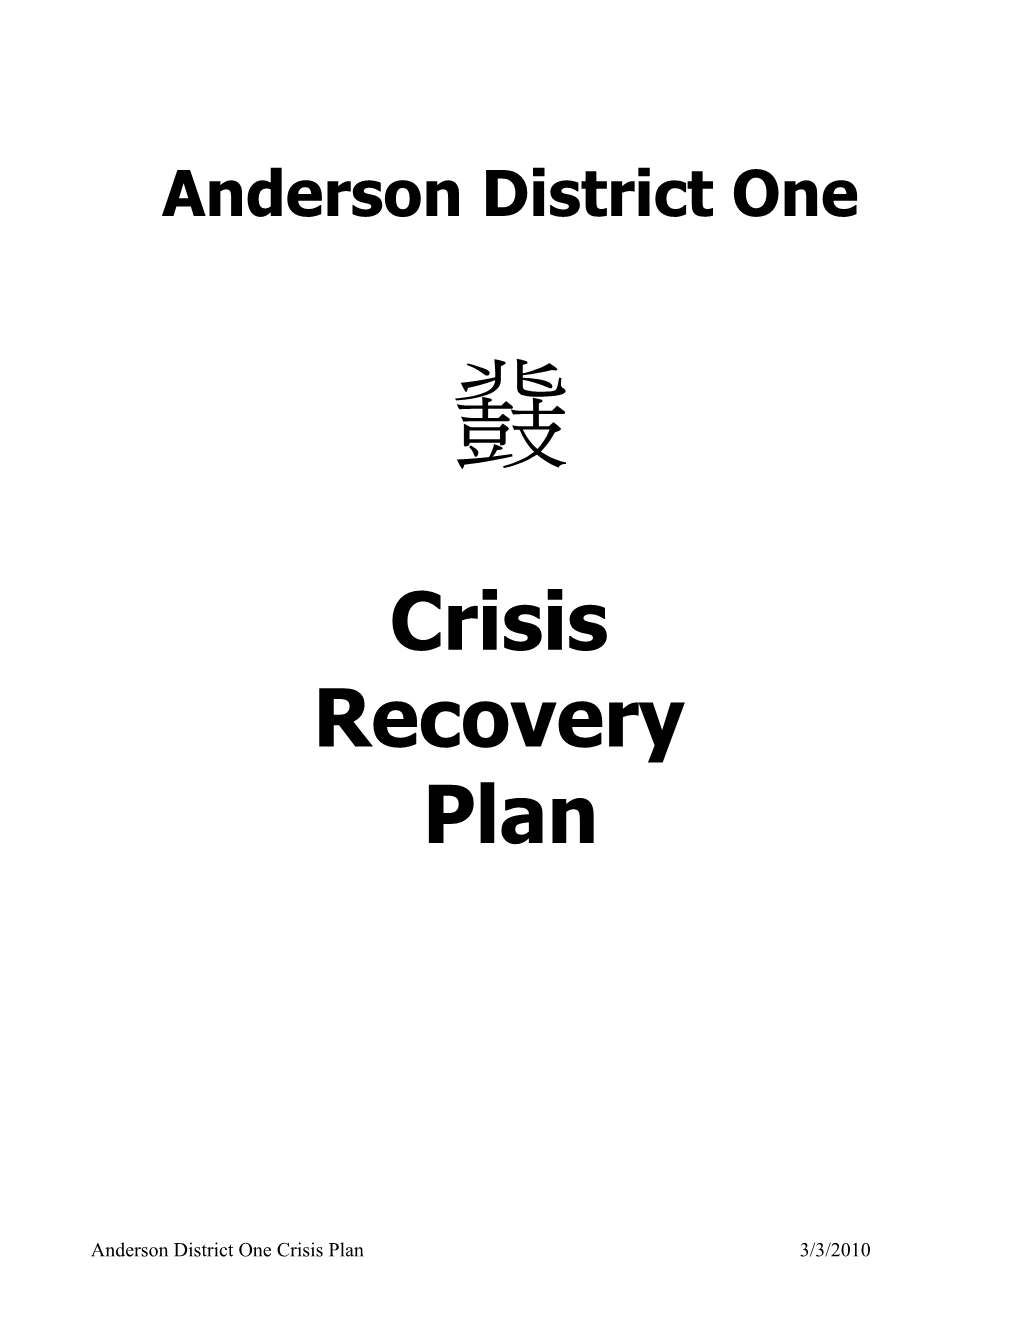 The Purposes of the Crisis Recovery Plan